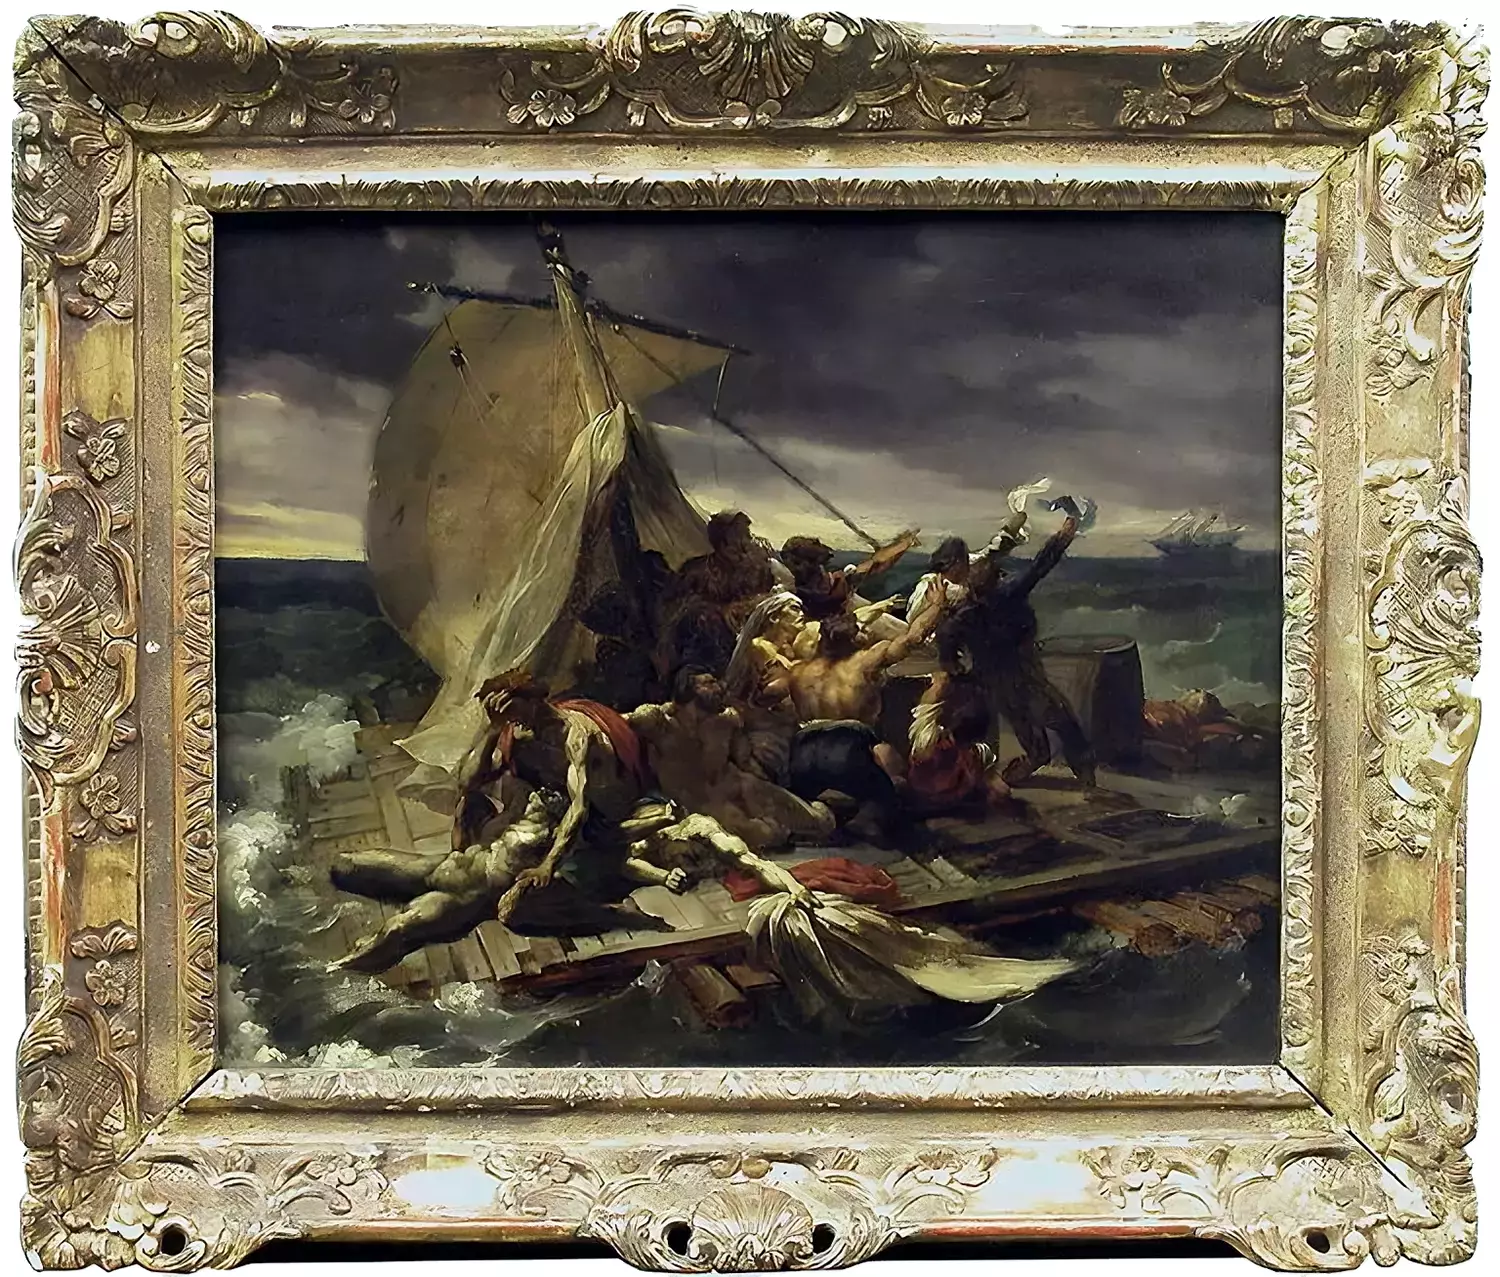 One Day, One Artwork - "The Raft of the Medusa" by Théodore Géricault